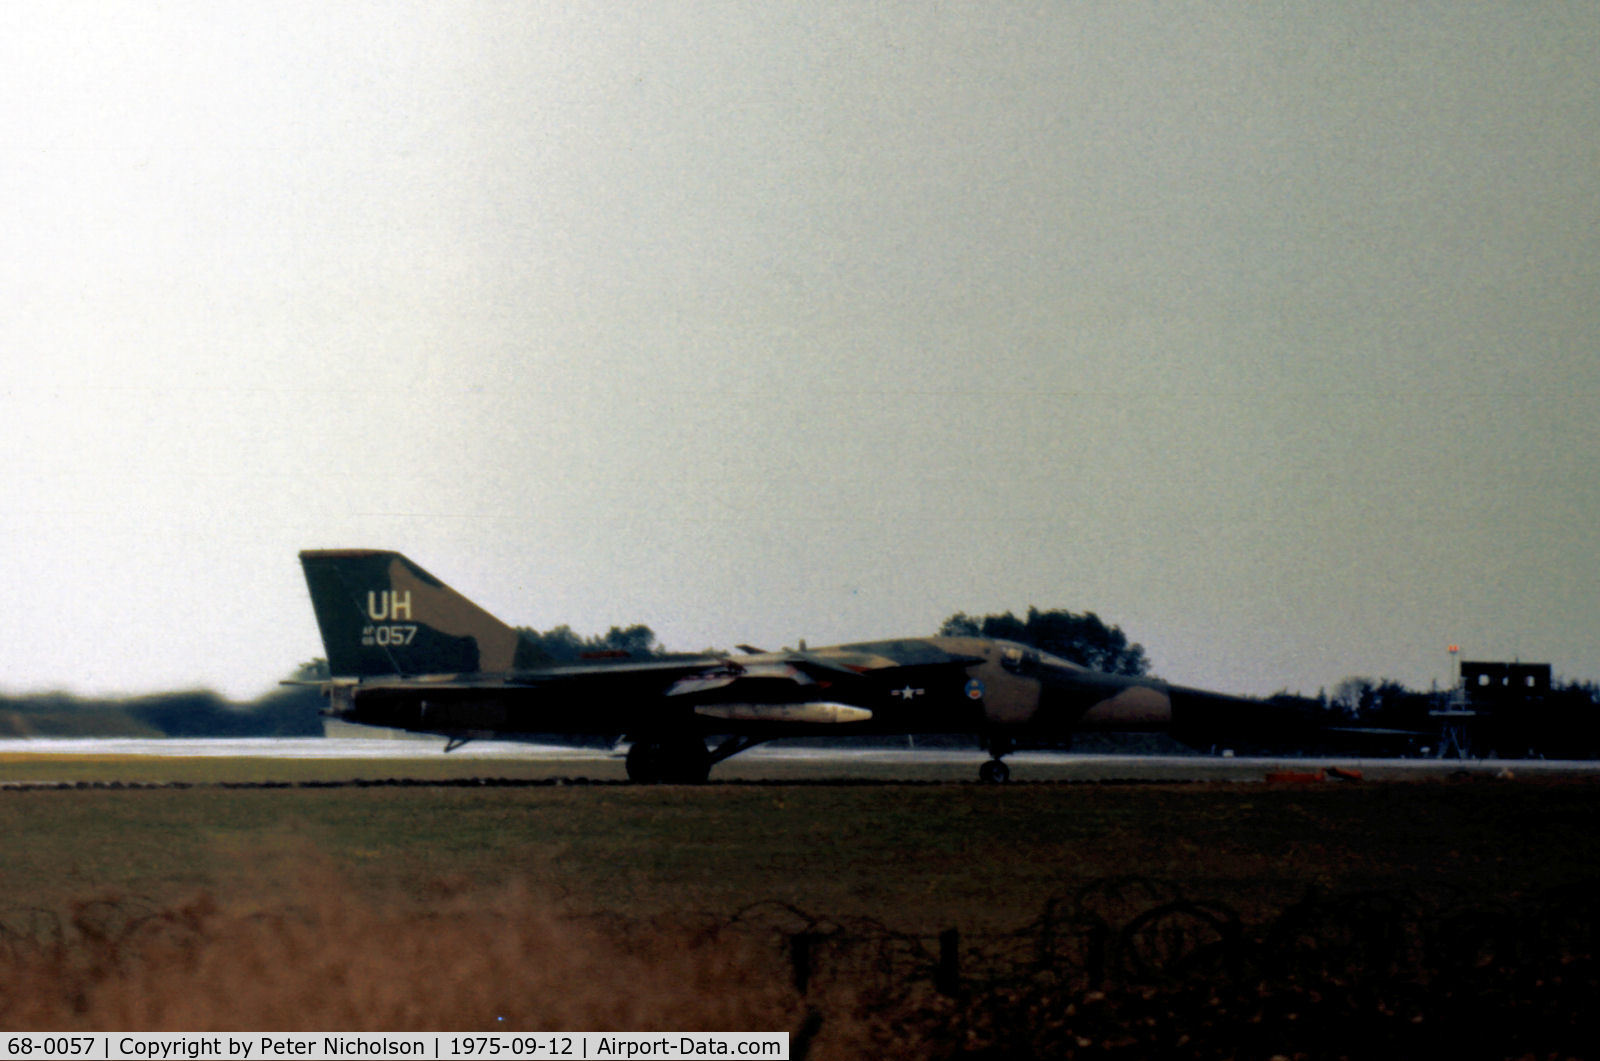 68-0057, 1968 General Dynamics F-111E Aardvark C/N A1-226, F-111E of 20th Tactical Fighter Wing taxying at RAF Upper Heyford in September 1975.